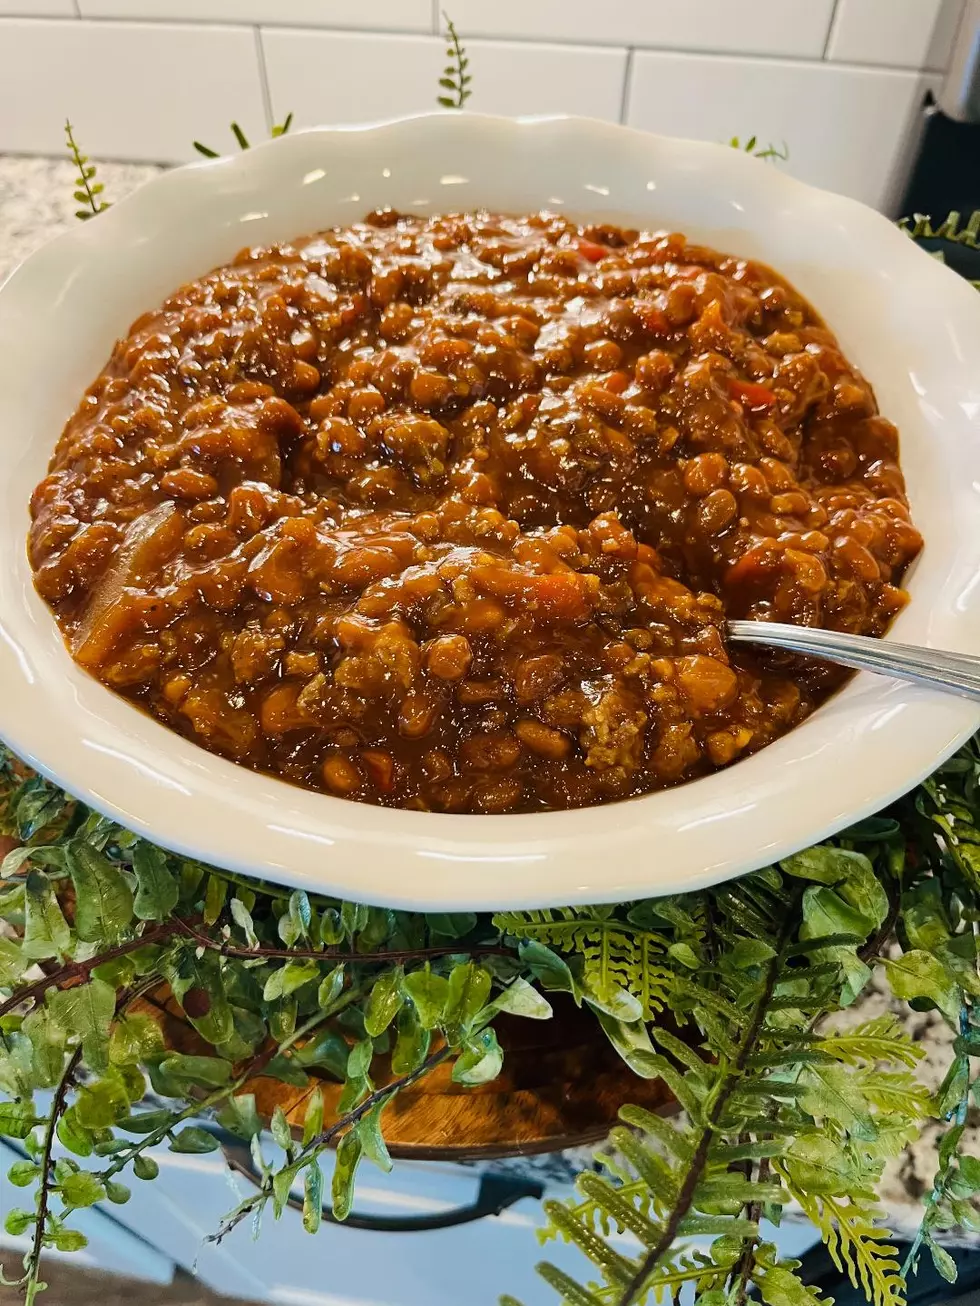 If You Love Baked Beans and Apple Pie, You’re Gonna Love This Tasty Dish!